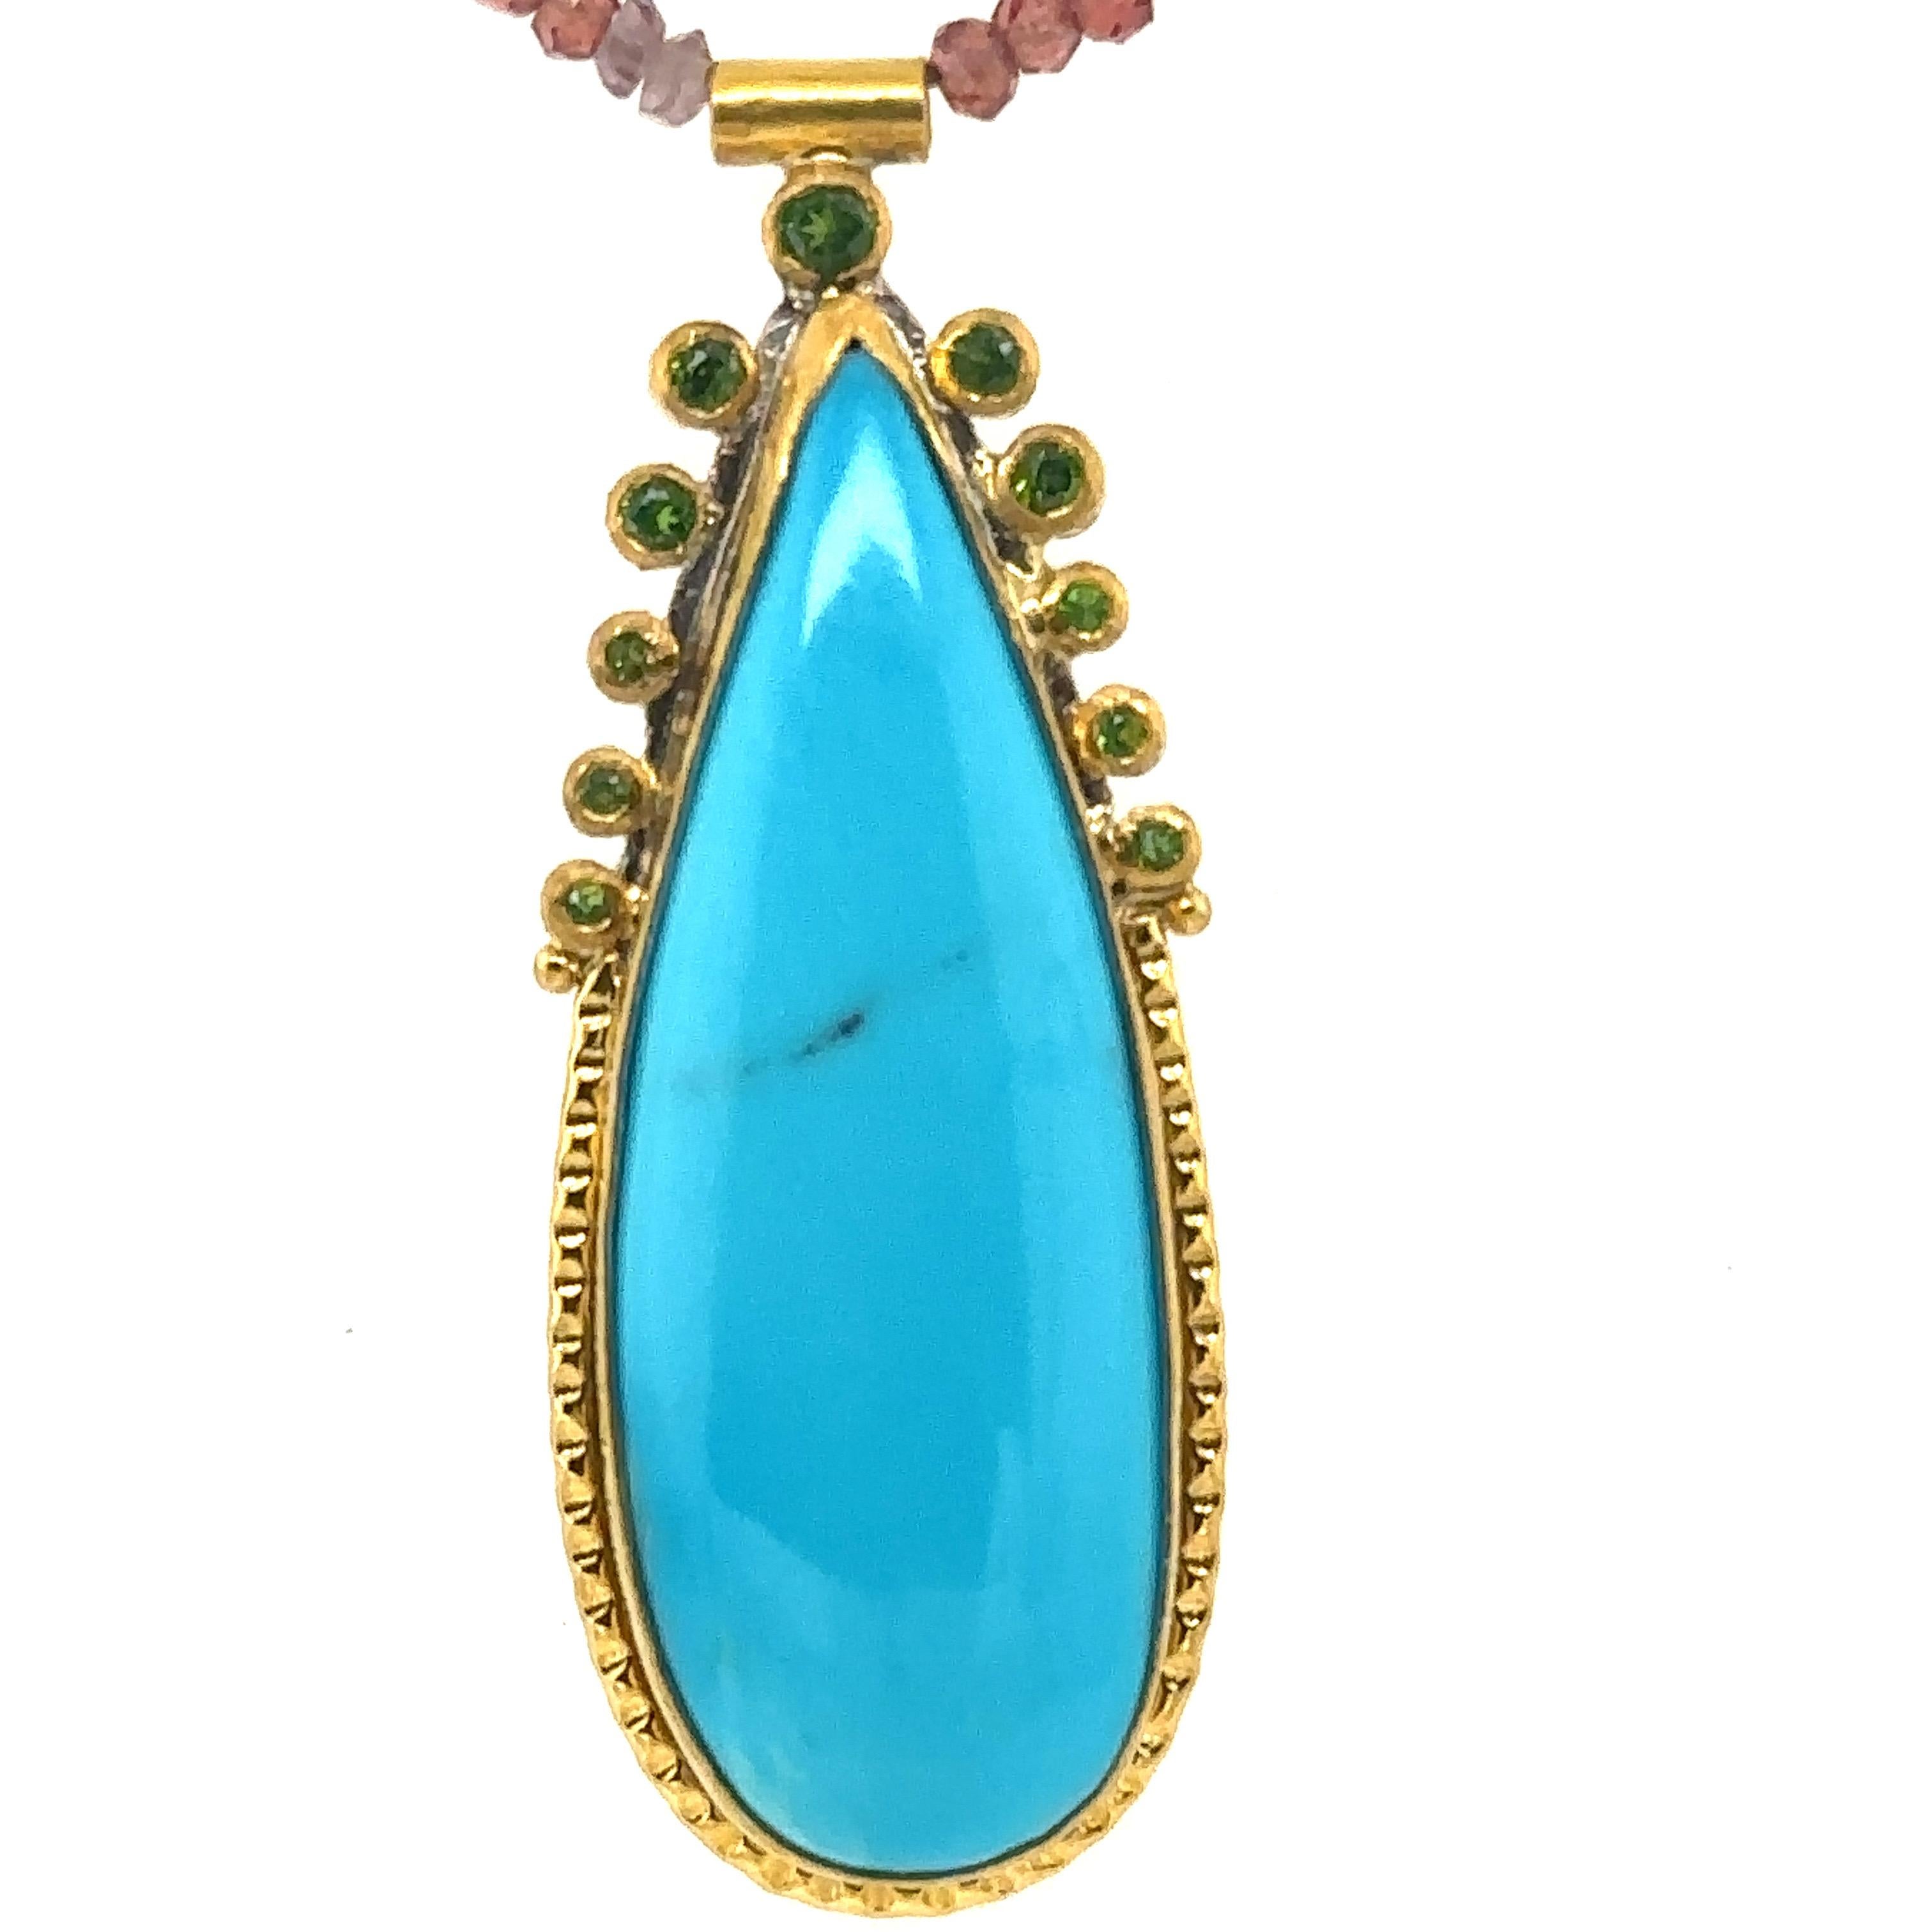 JAS-19-1845 - 24K GOLD/STERLING SILVER w KINGMAN TURQUOISE & MULTI COLOR BEADS For Sale 4